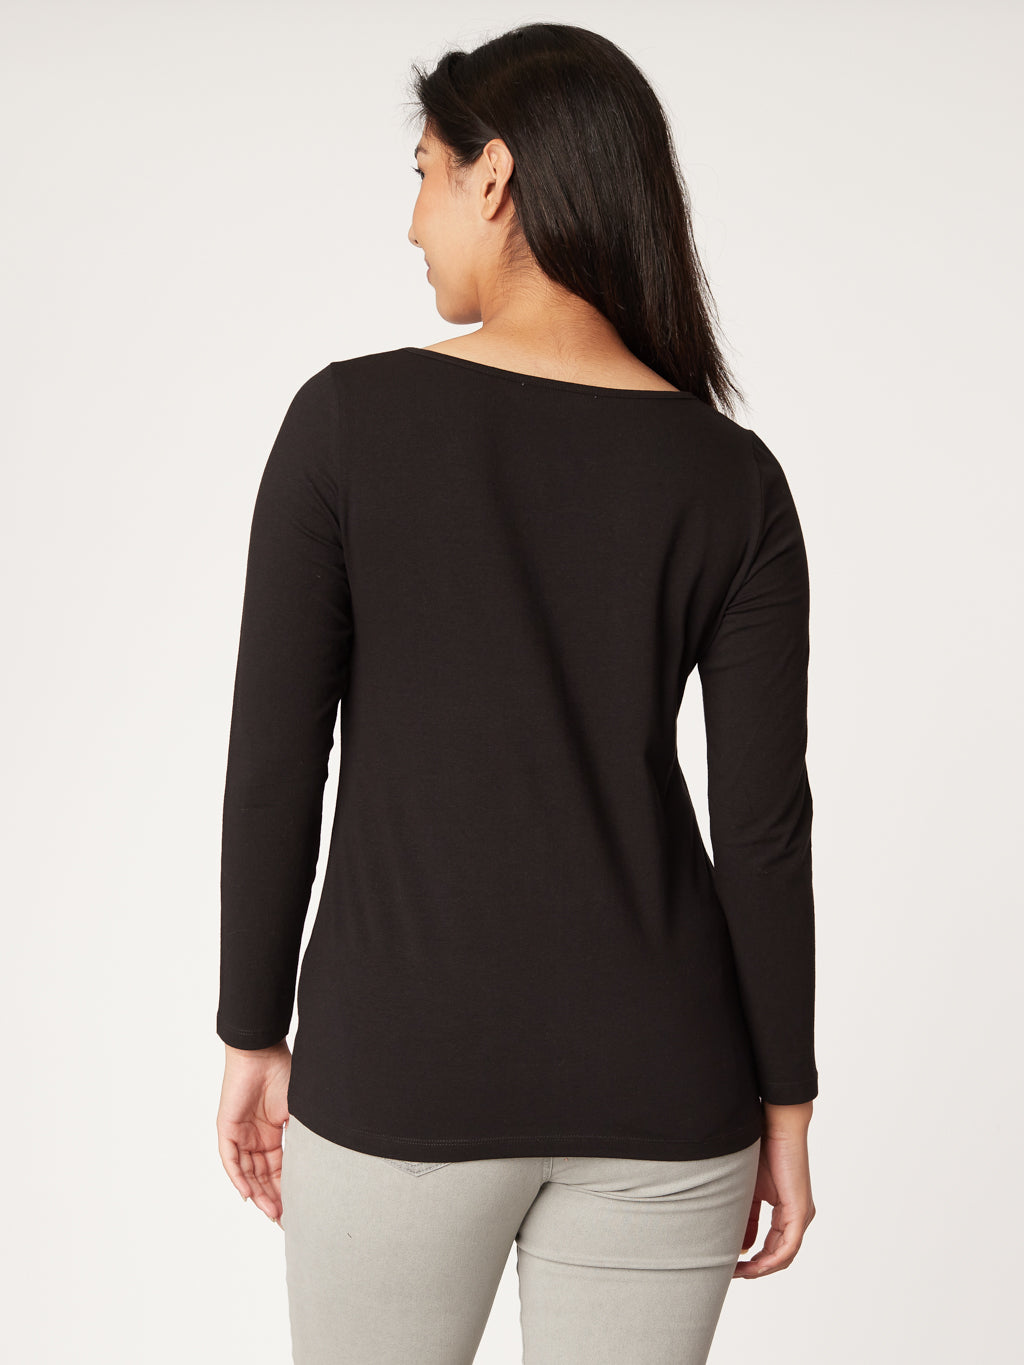 Long-sleeves fitted t-shirt